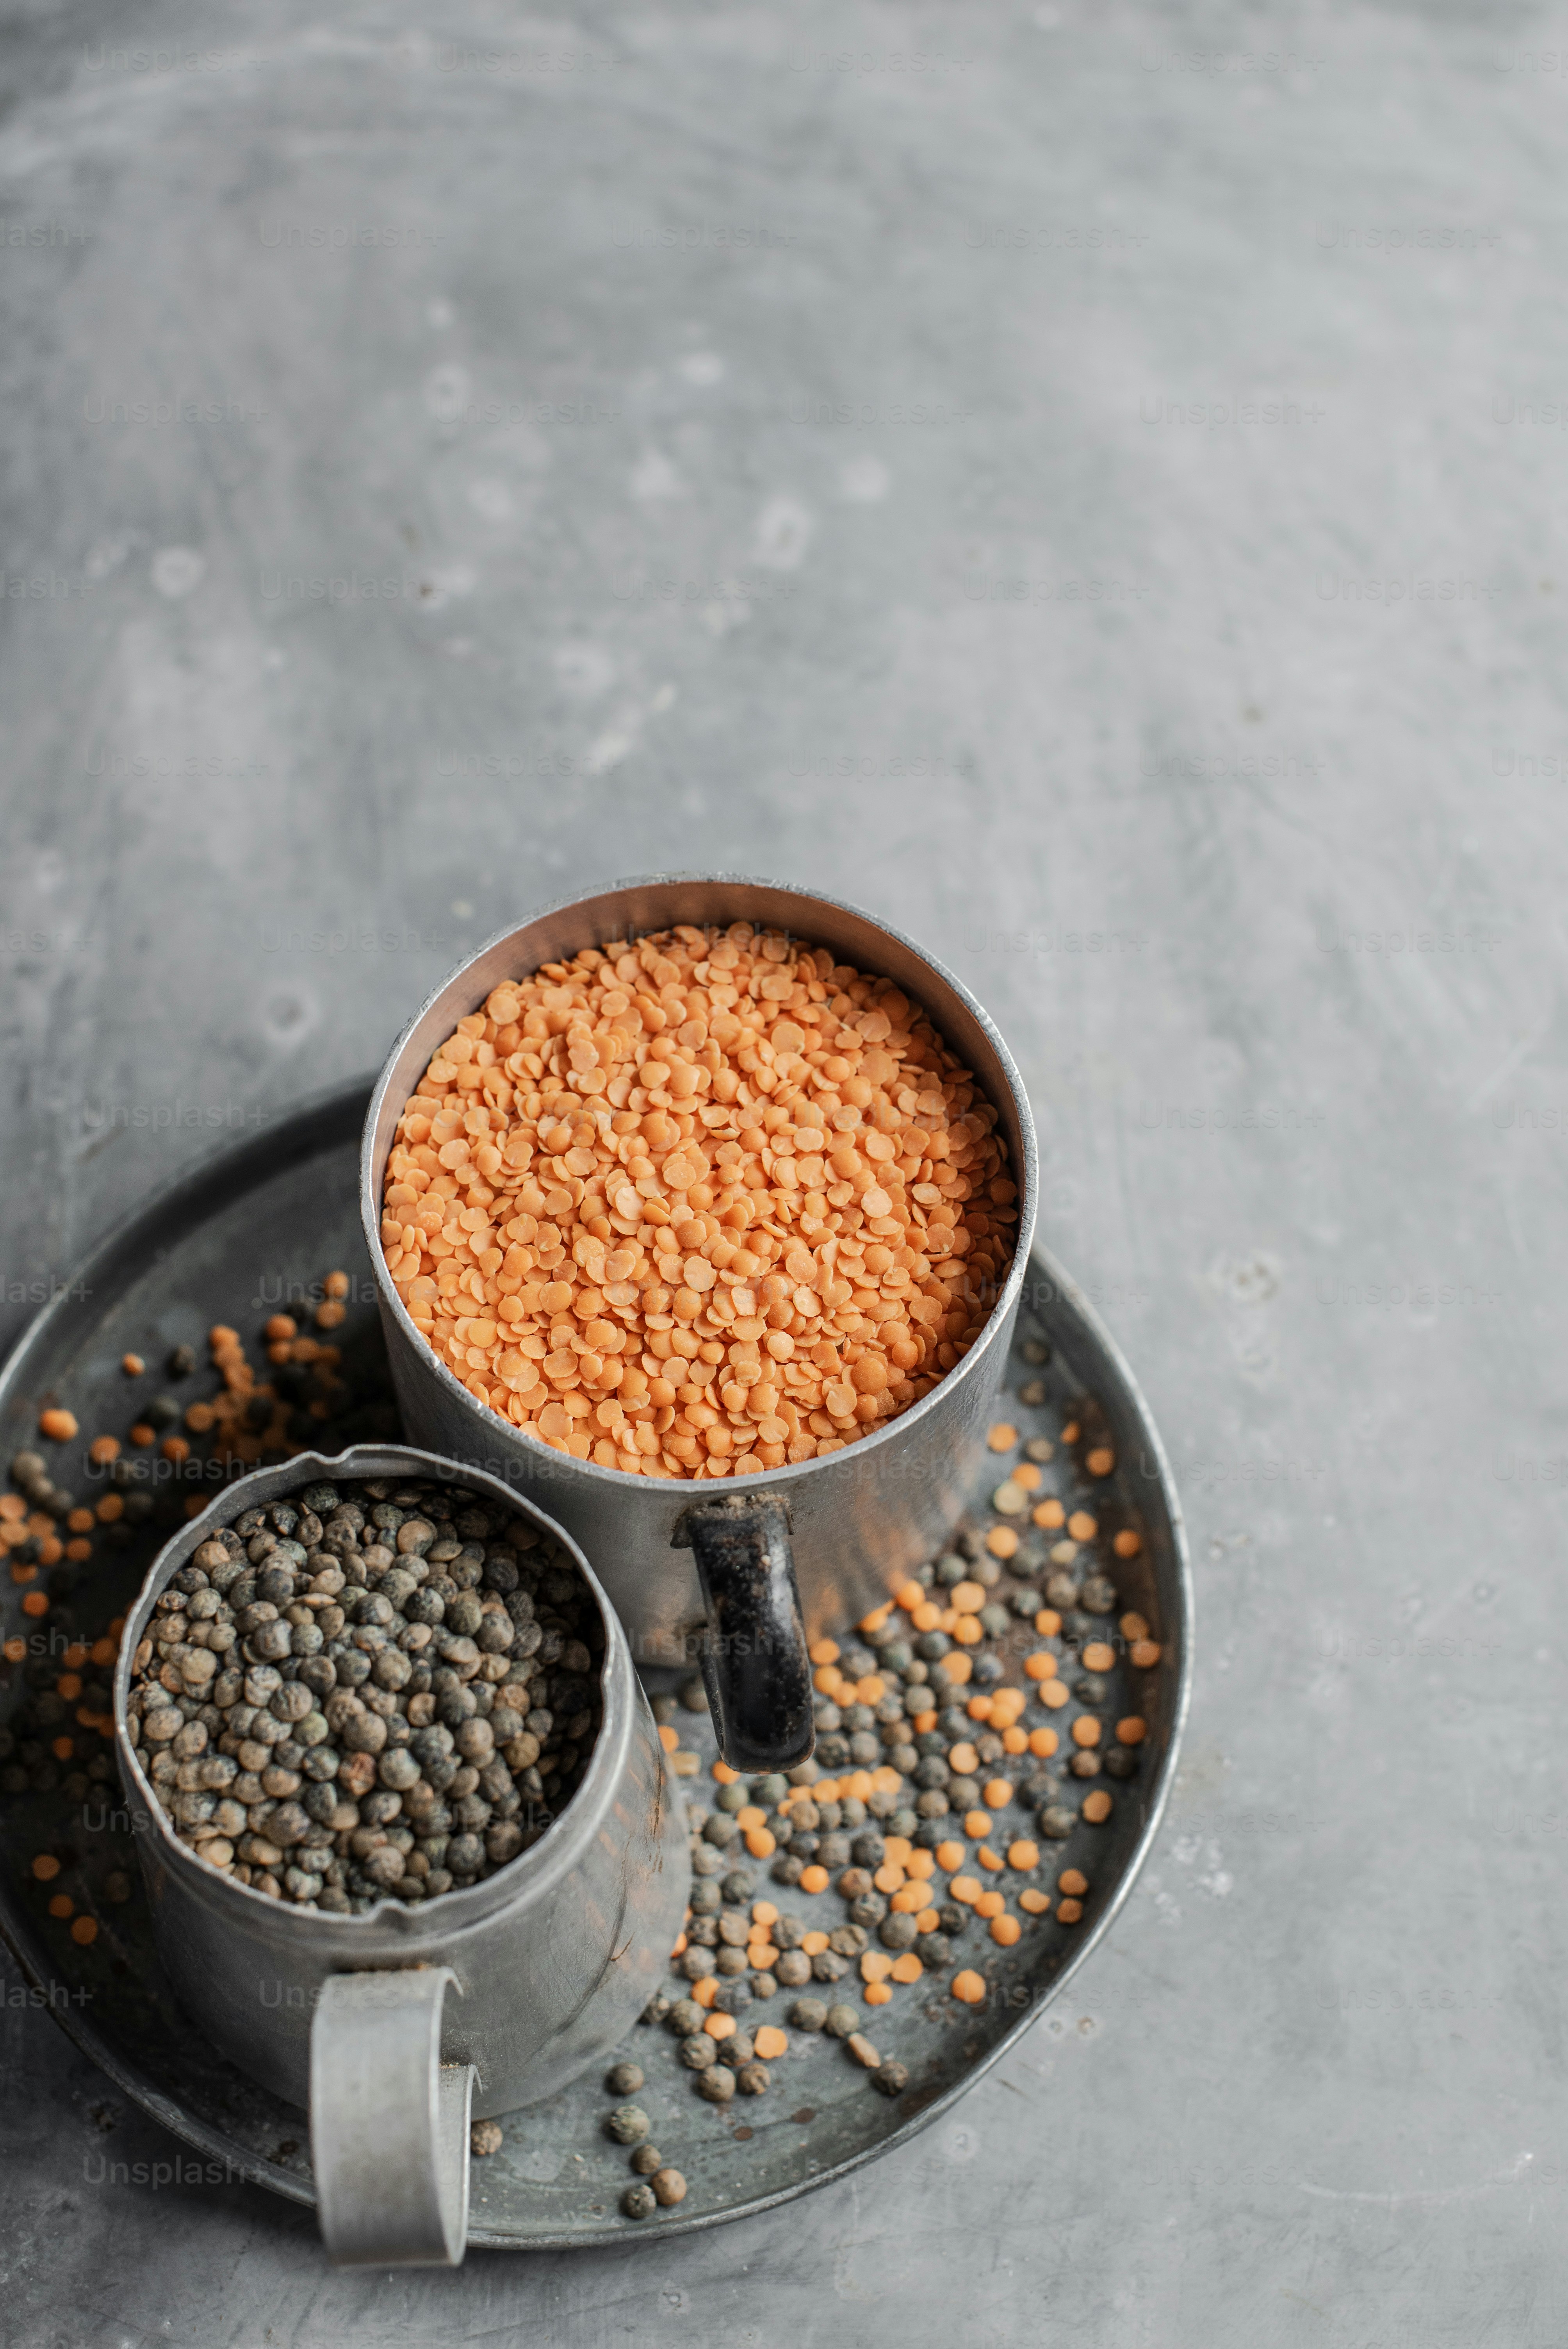 Red, green and brown lentils in a metal cups on a metal plate on a grey background.